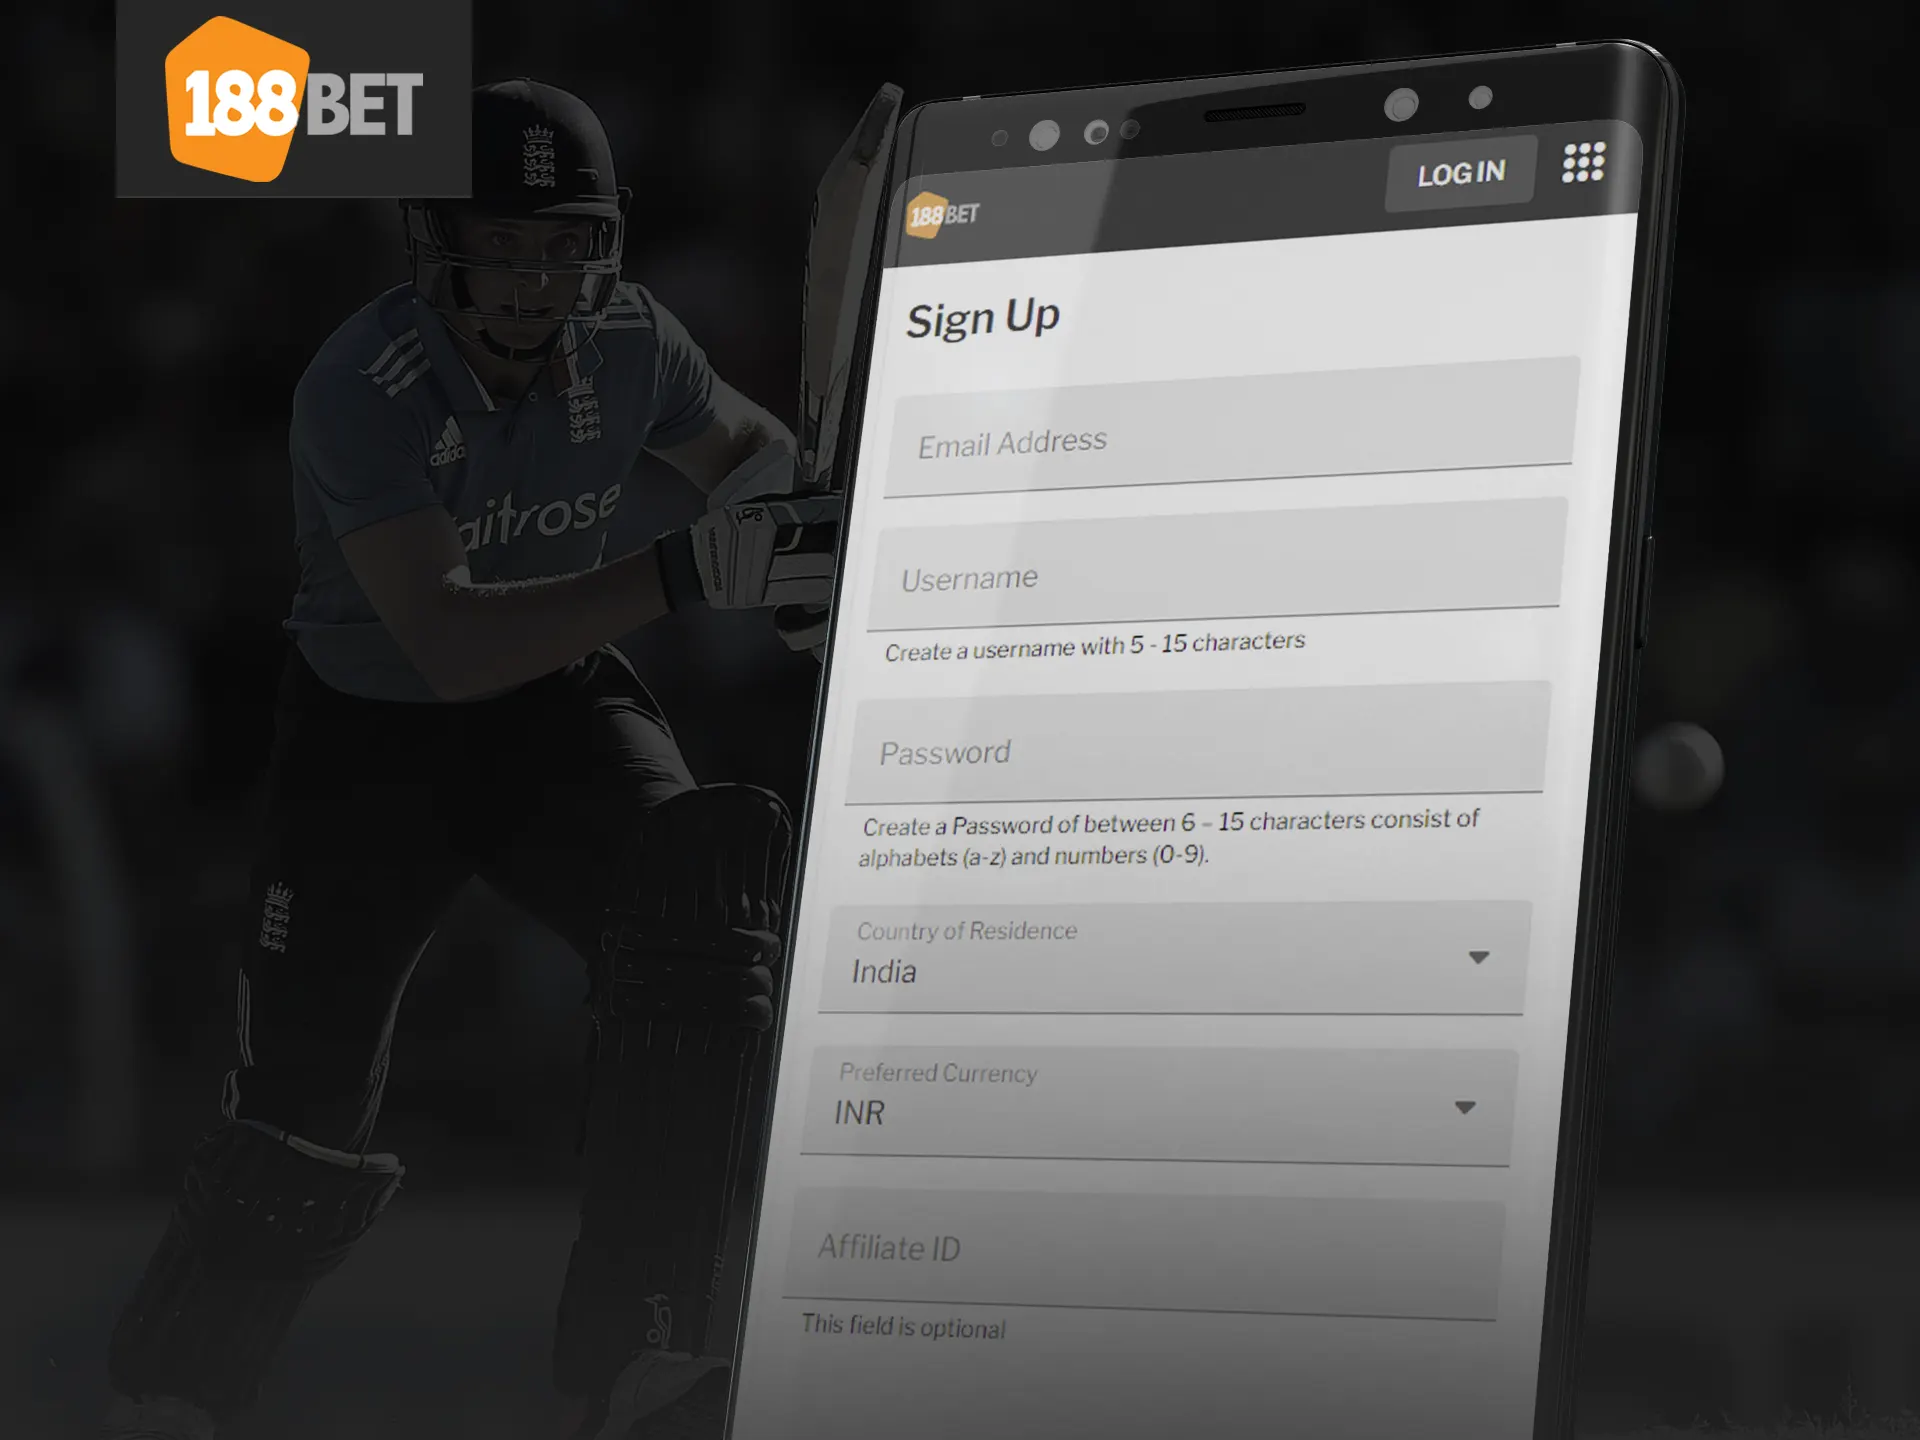 Sign up on the 188bet app and get bonuses.